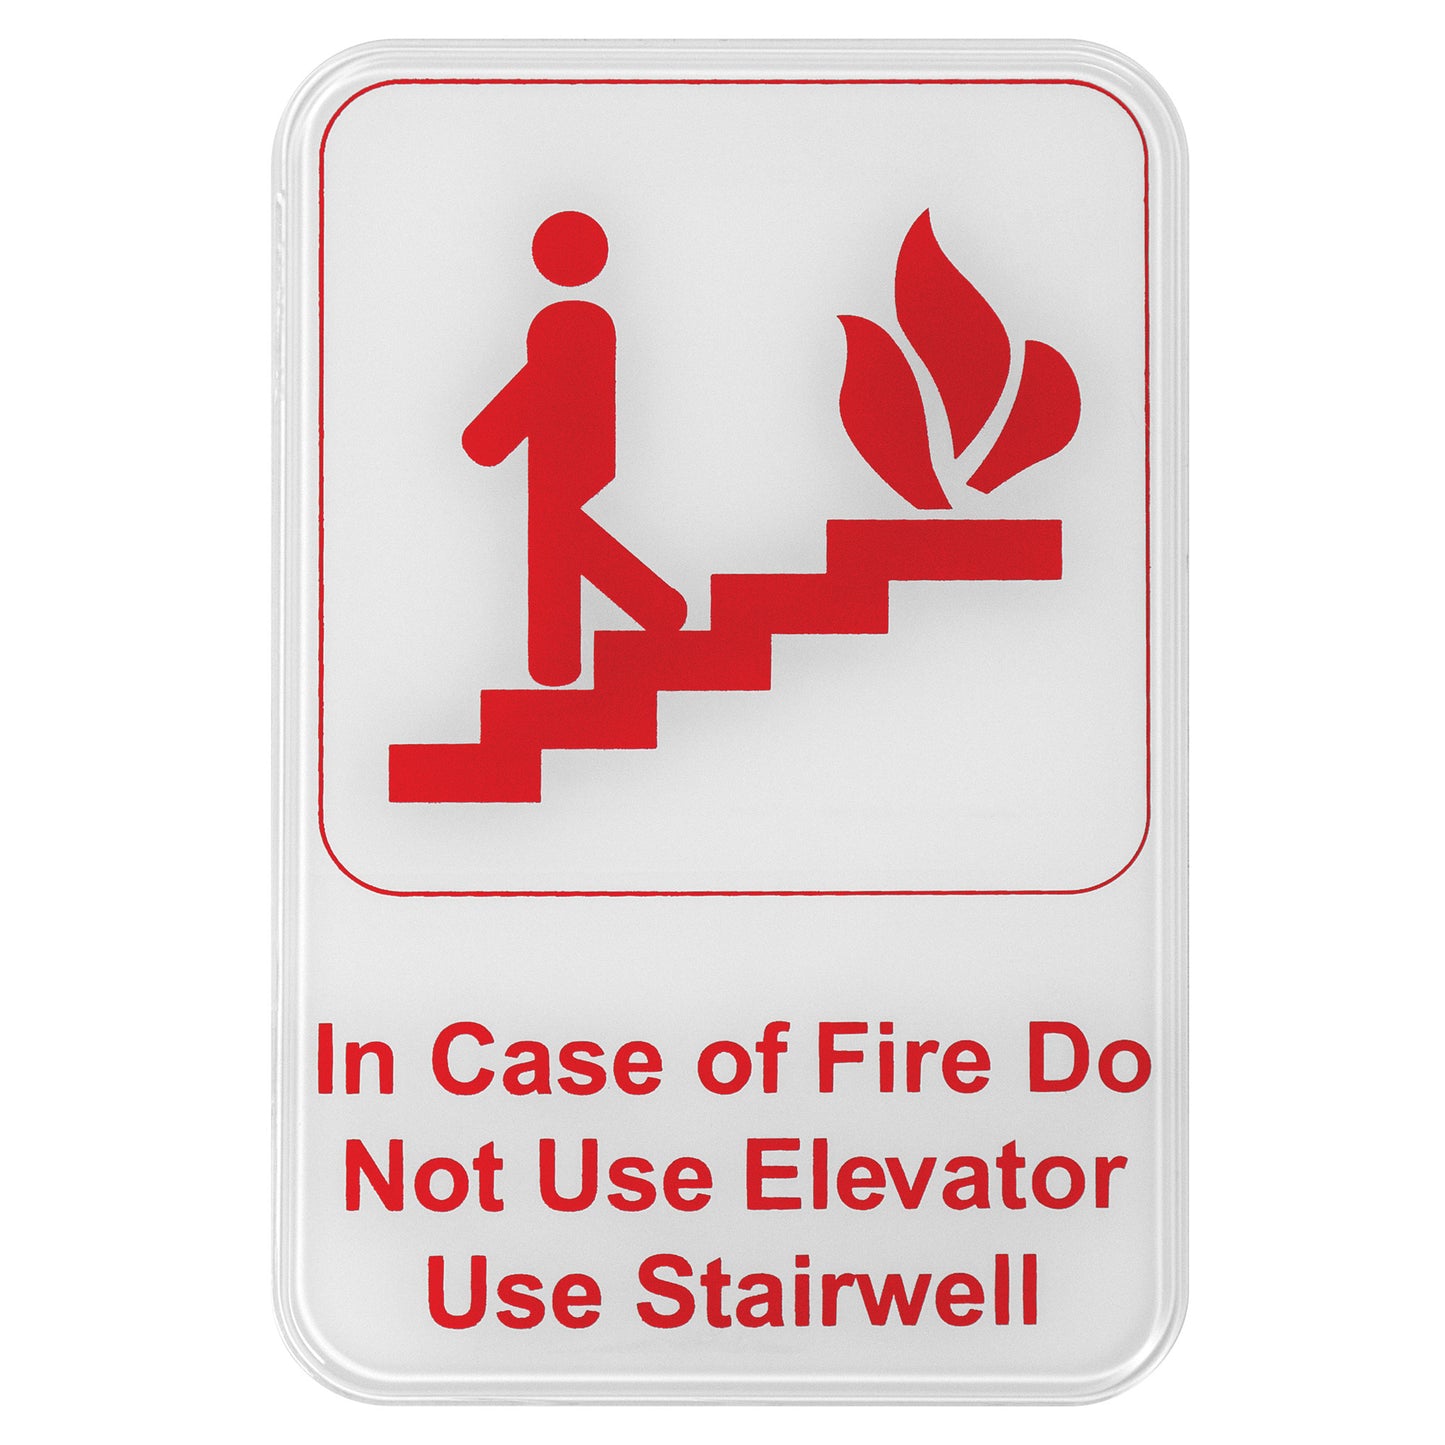 SGN-683W - Information Sign, 6"W x 9"H - In Case of Fire